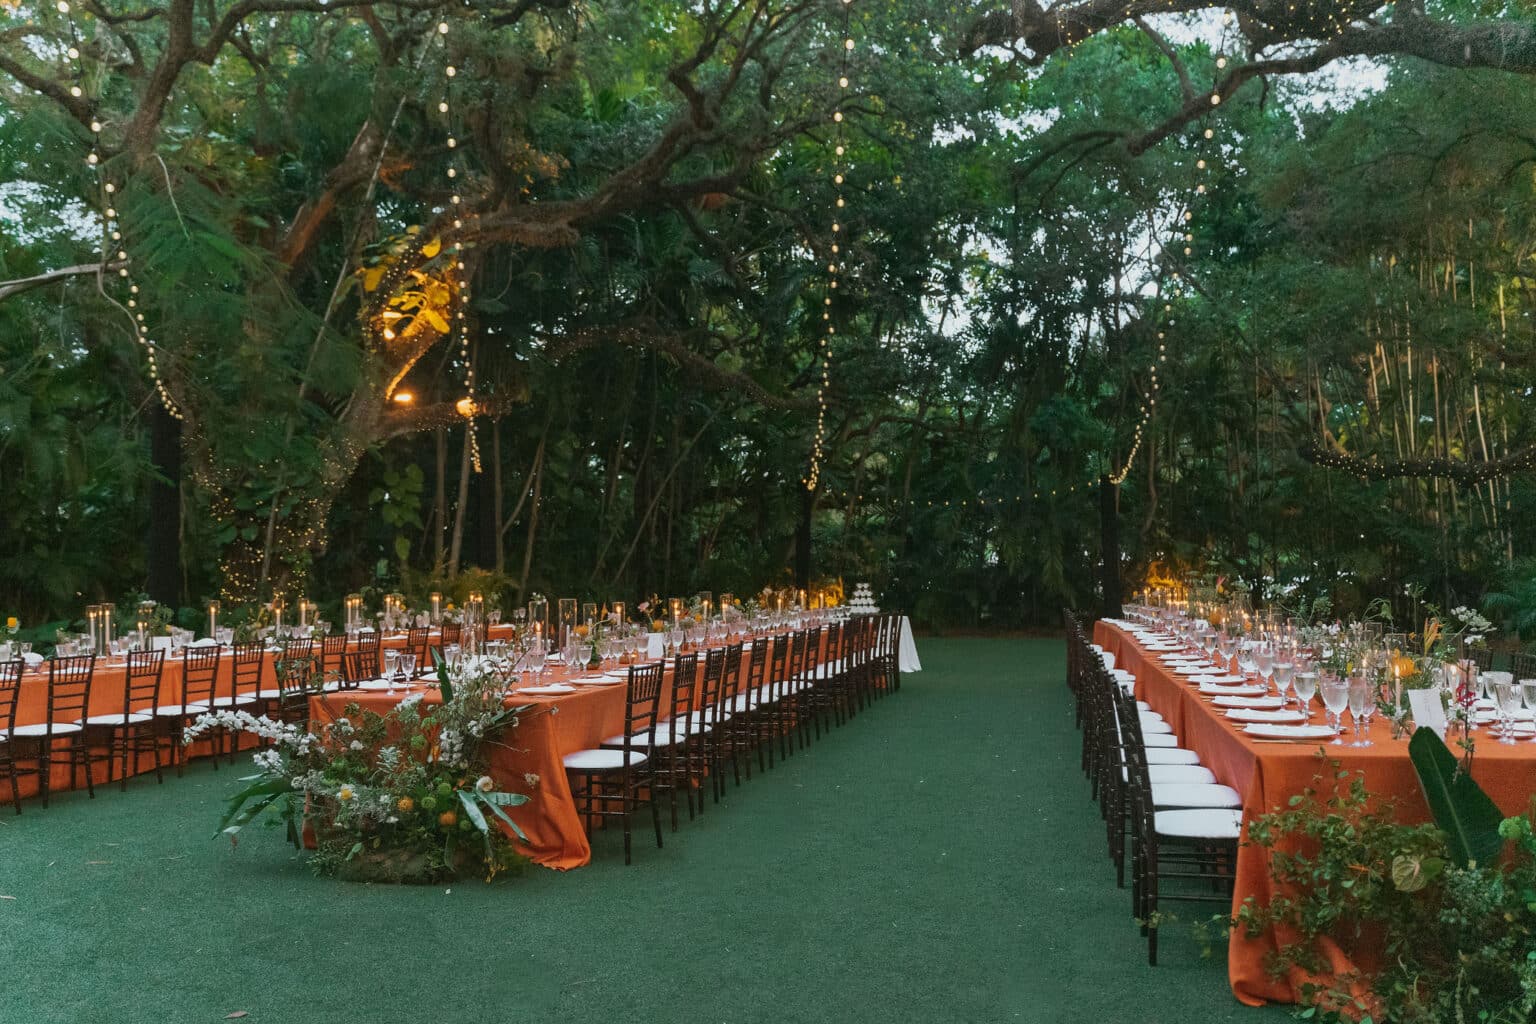 two long tables with unique floral installs at the ends